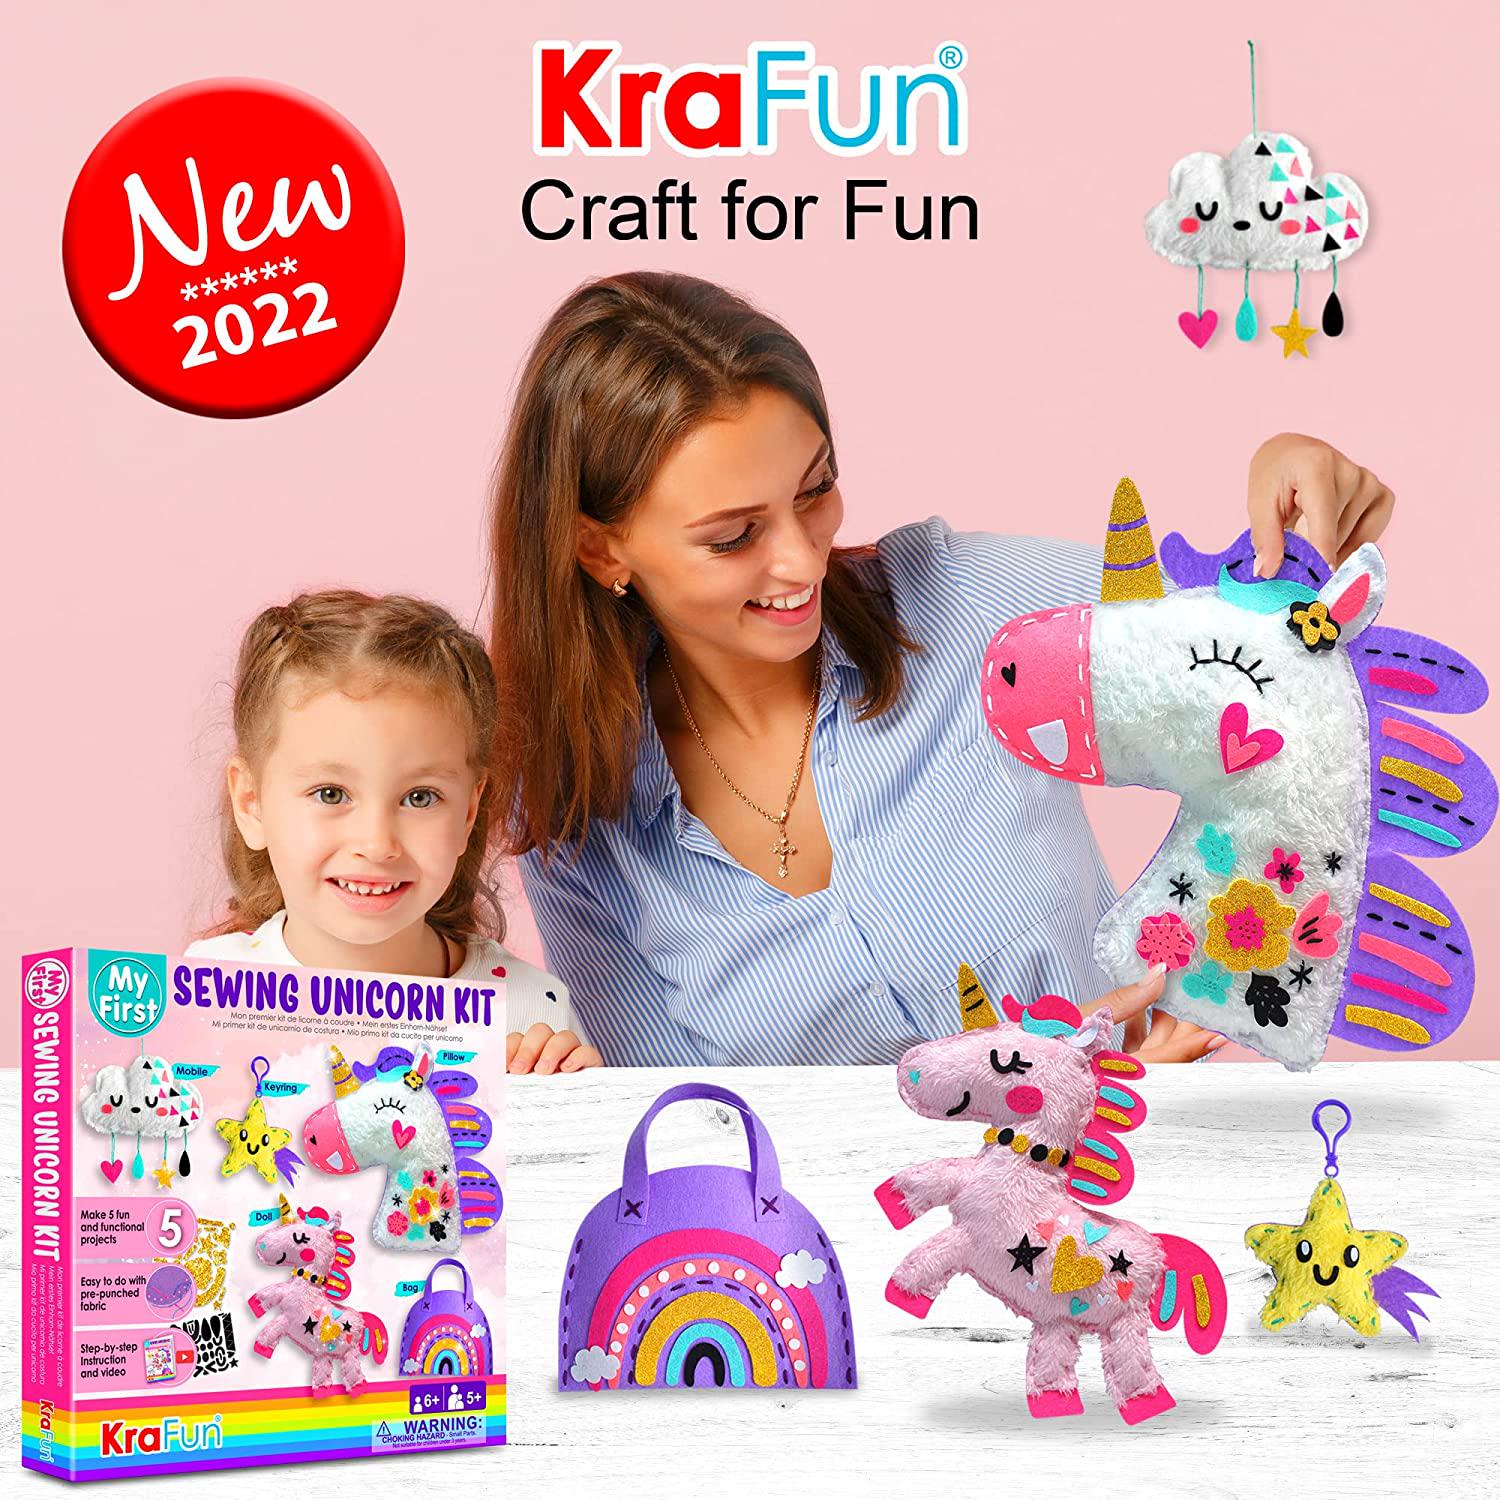 KRAFUN, KRAFUN My First Unicorn Kids Sewing kit, Beginner Arts and Crafts, Make 5 Cute Projects with Plush Stuffed Animal, Pillow, Mobile, Keyring and Bag, Instructions and Felt for Learn Sewing, Embroidery